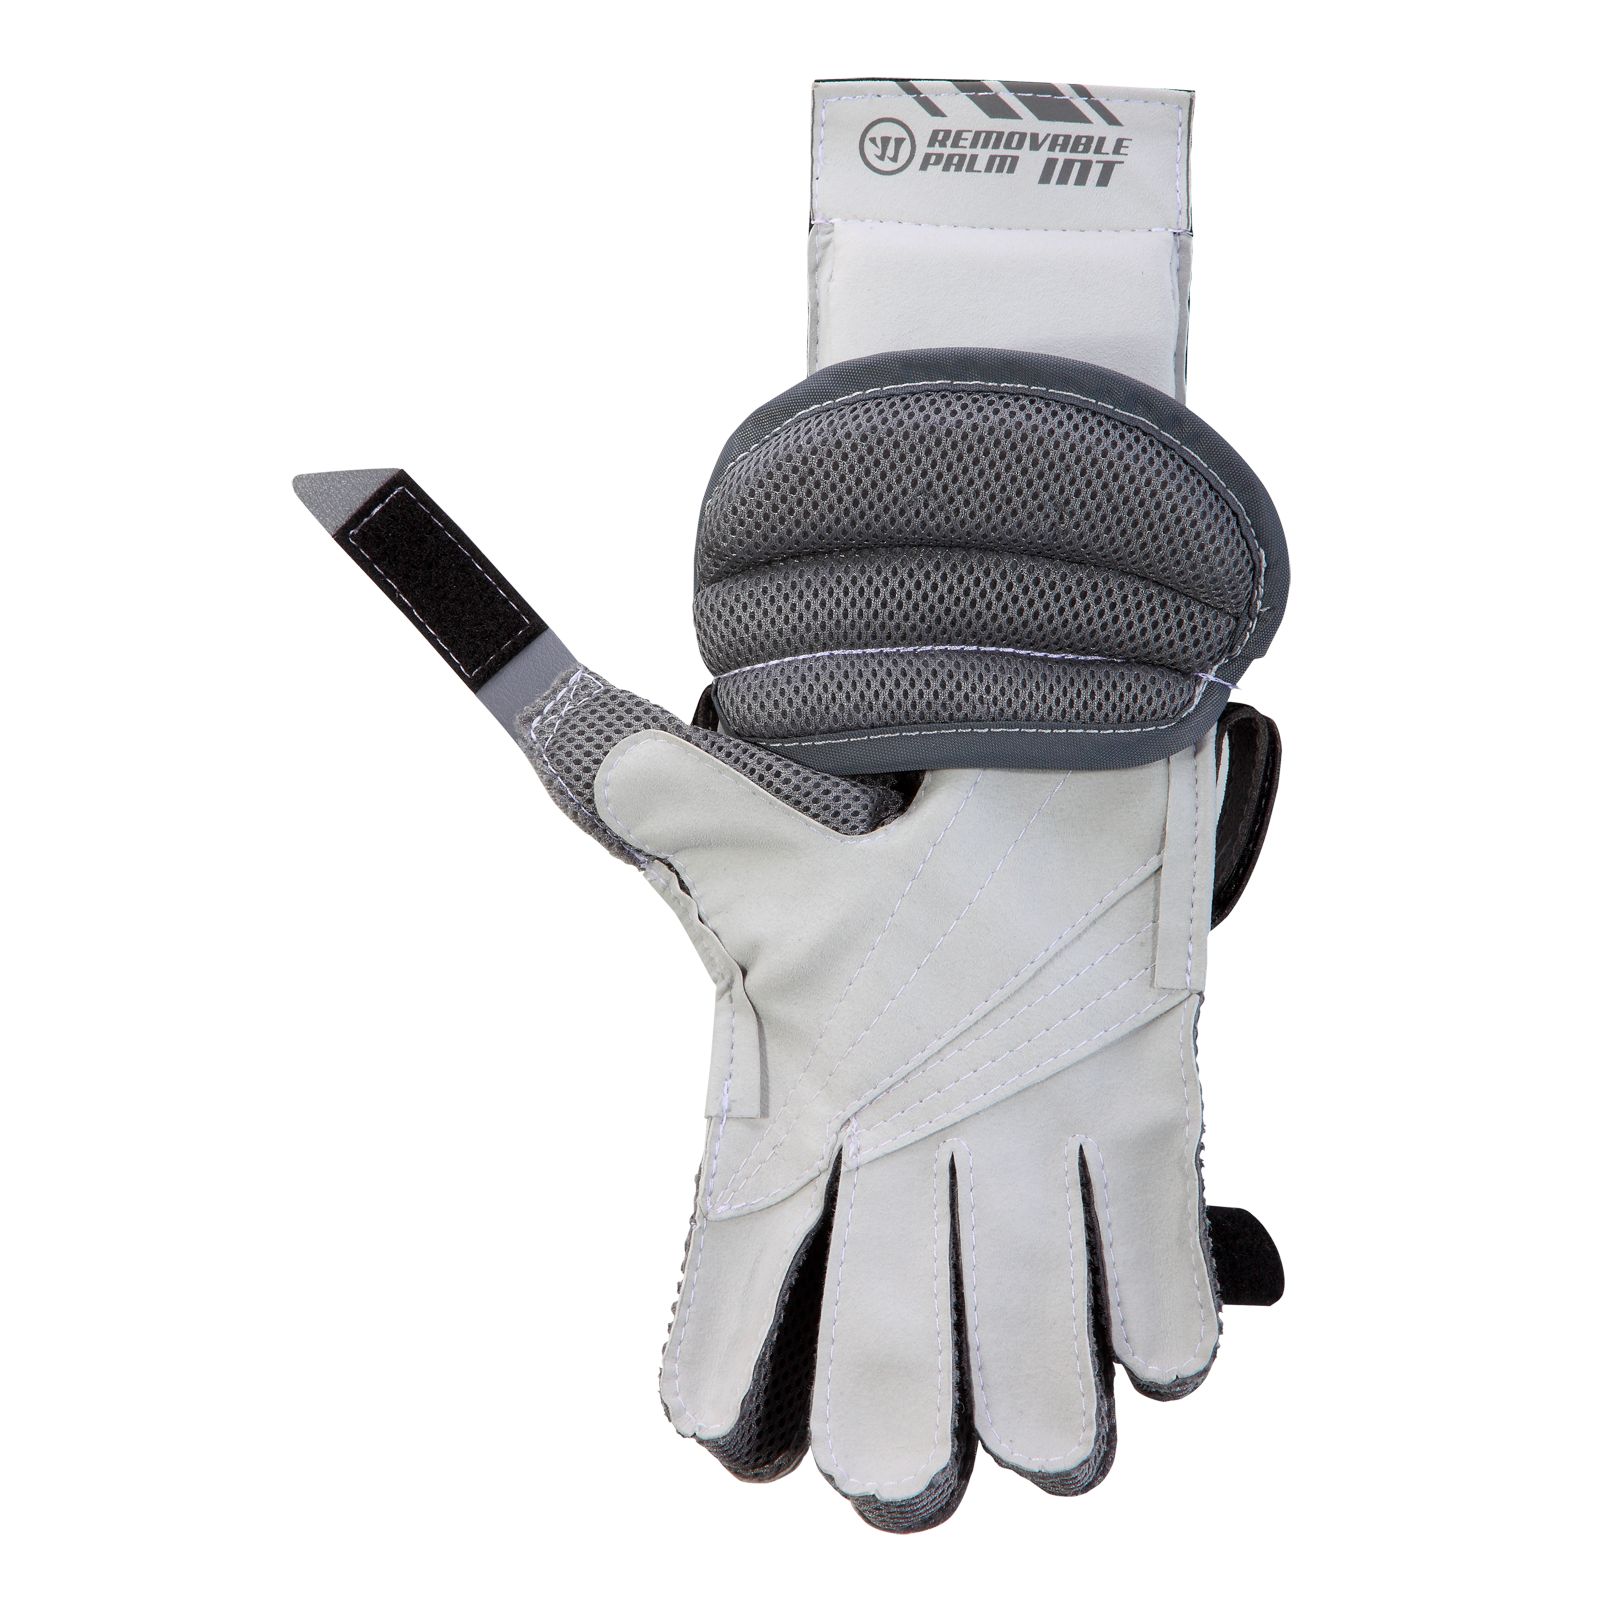 Ritual G3 INT Blocker Palm, White with Black image number 0